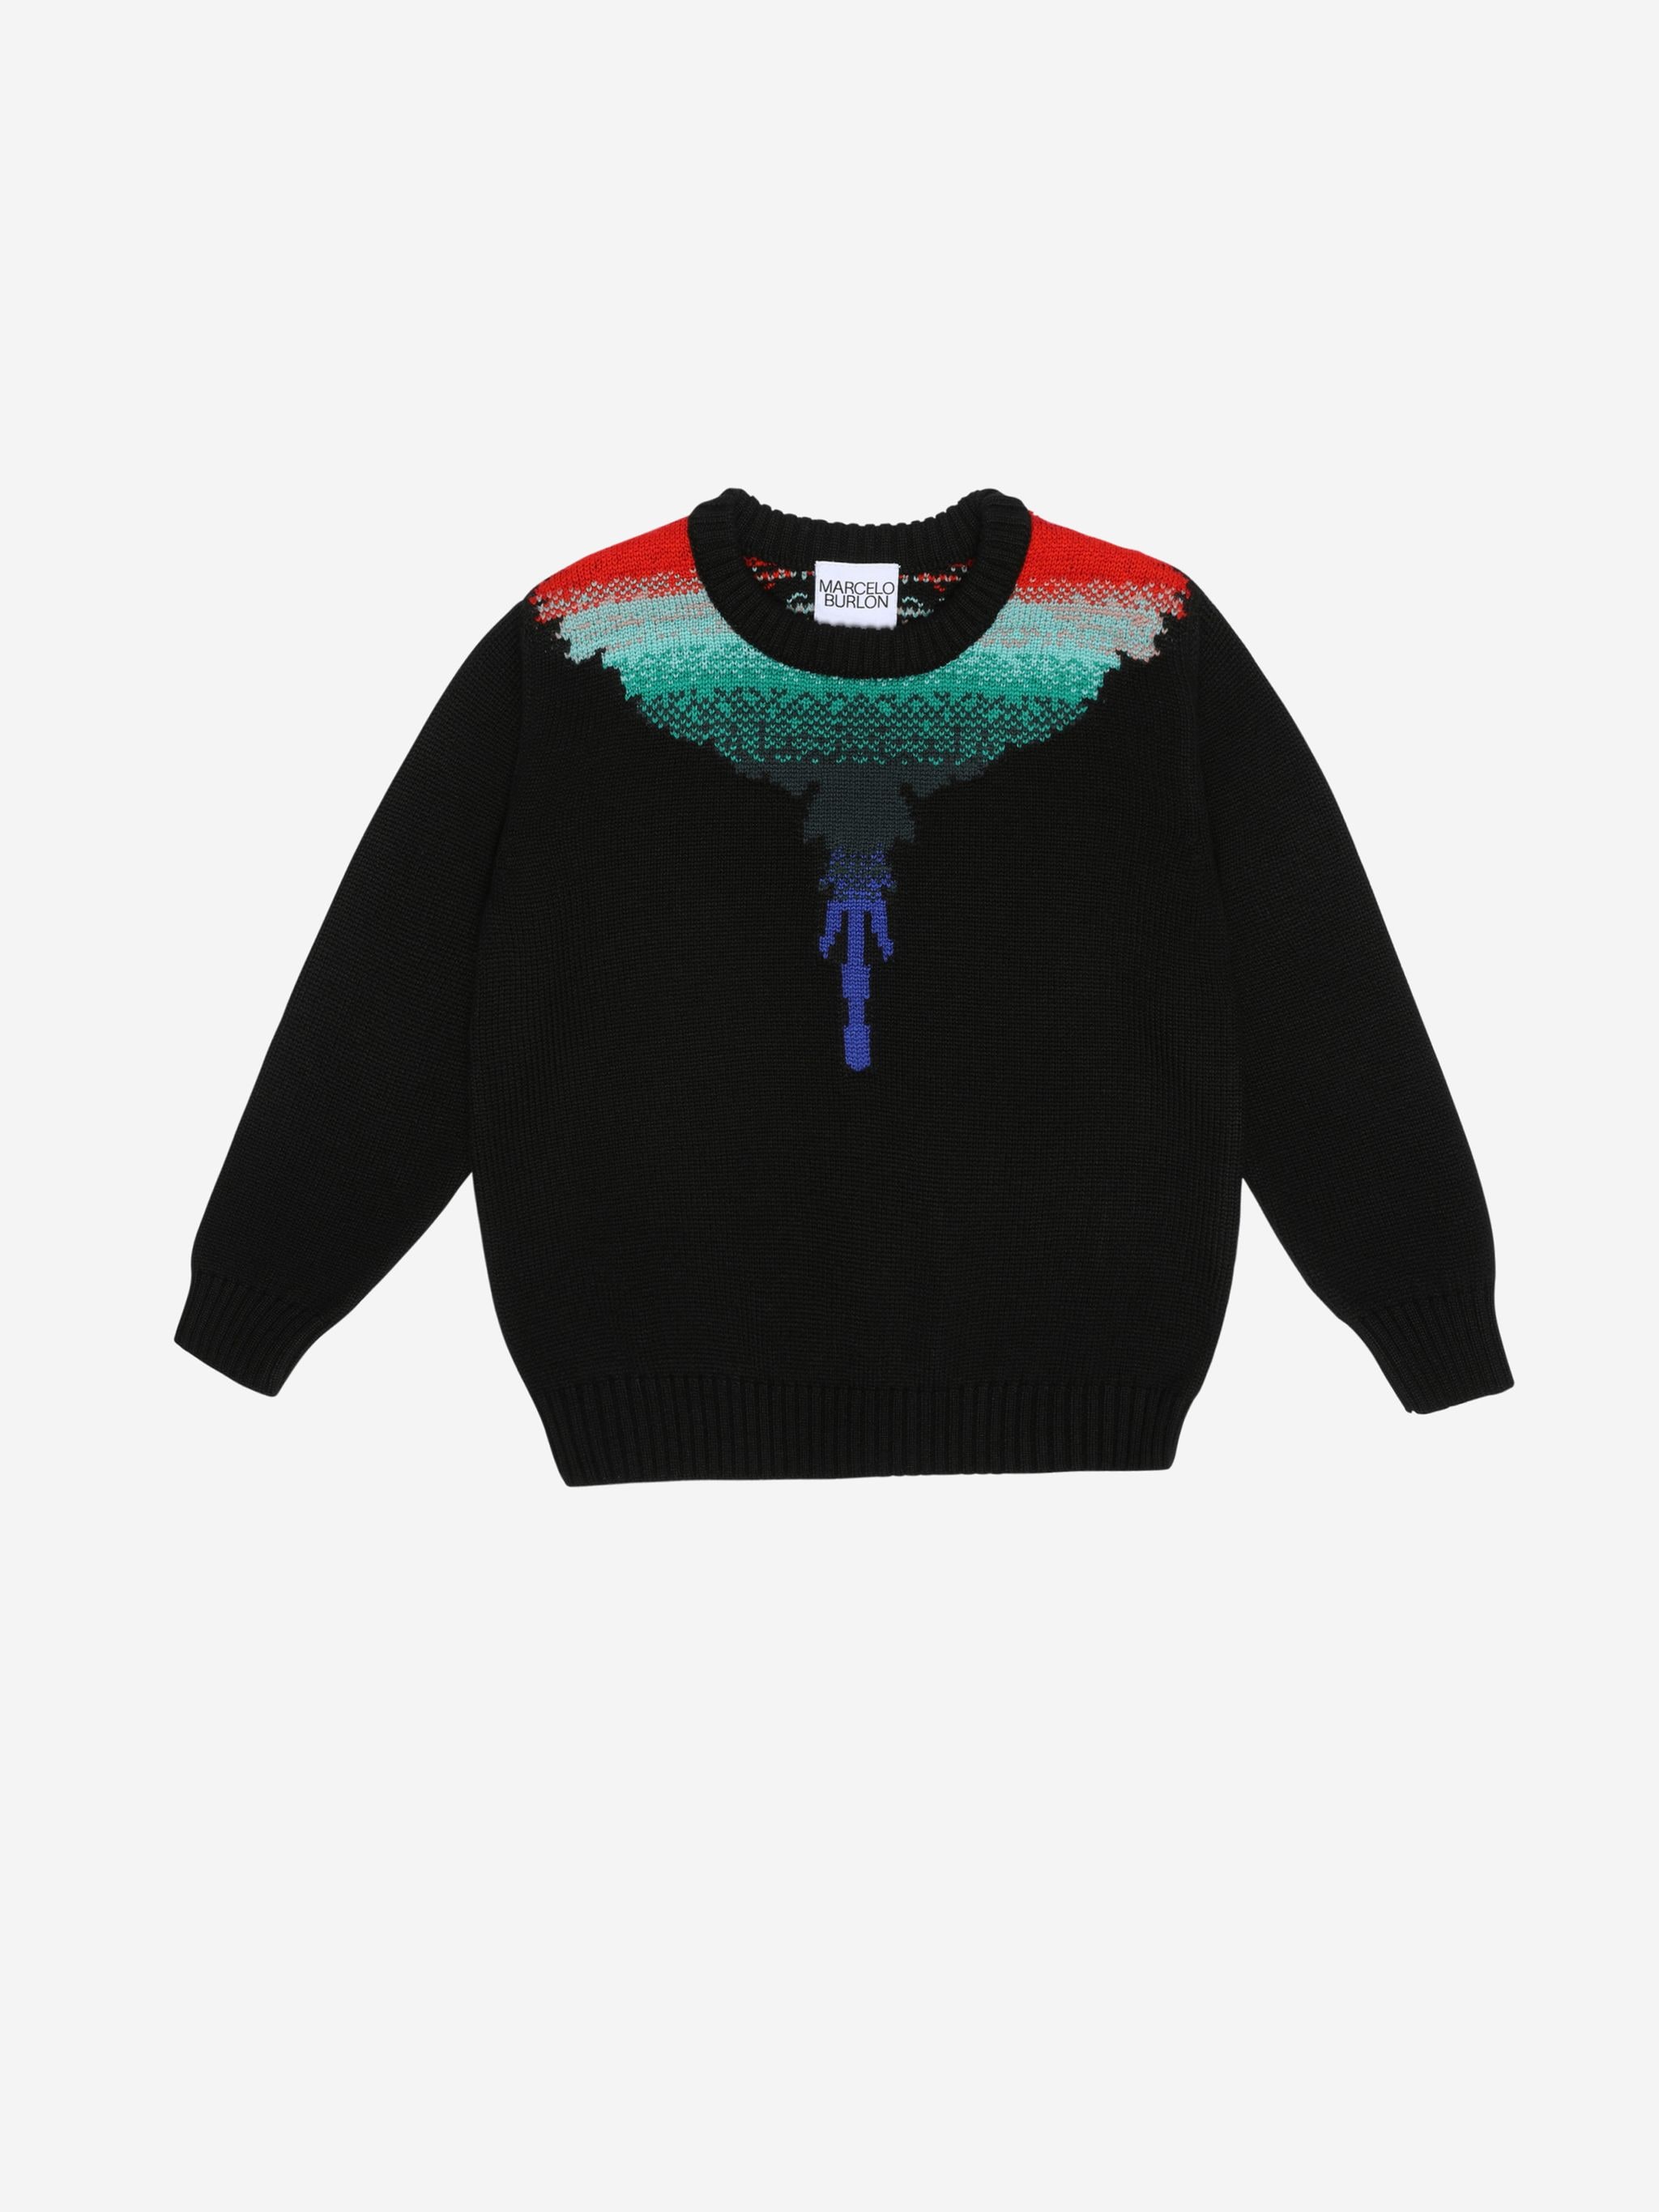 Black wool Wings knit jumper from Marcelo Burlon Kids featuring signature Marcelo Burlon Wings print, round neck, long sleeves and straight hem.